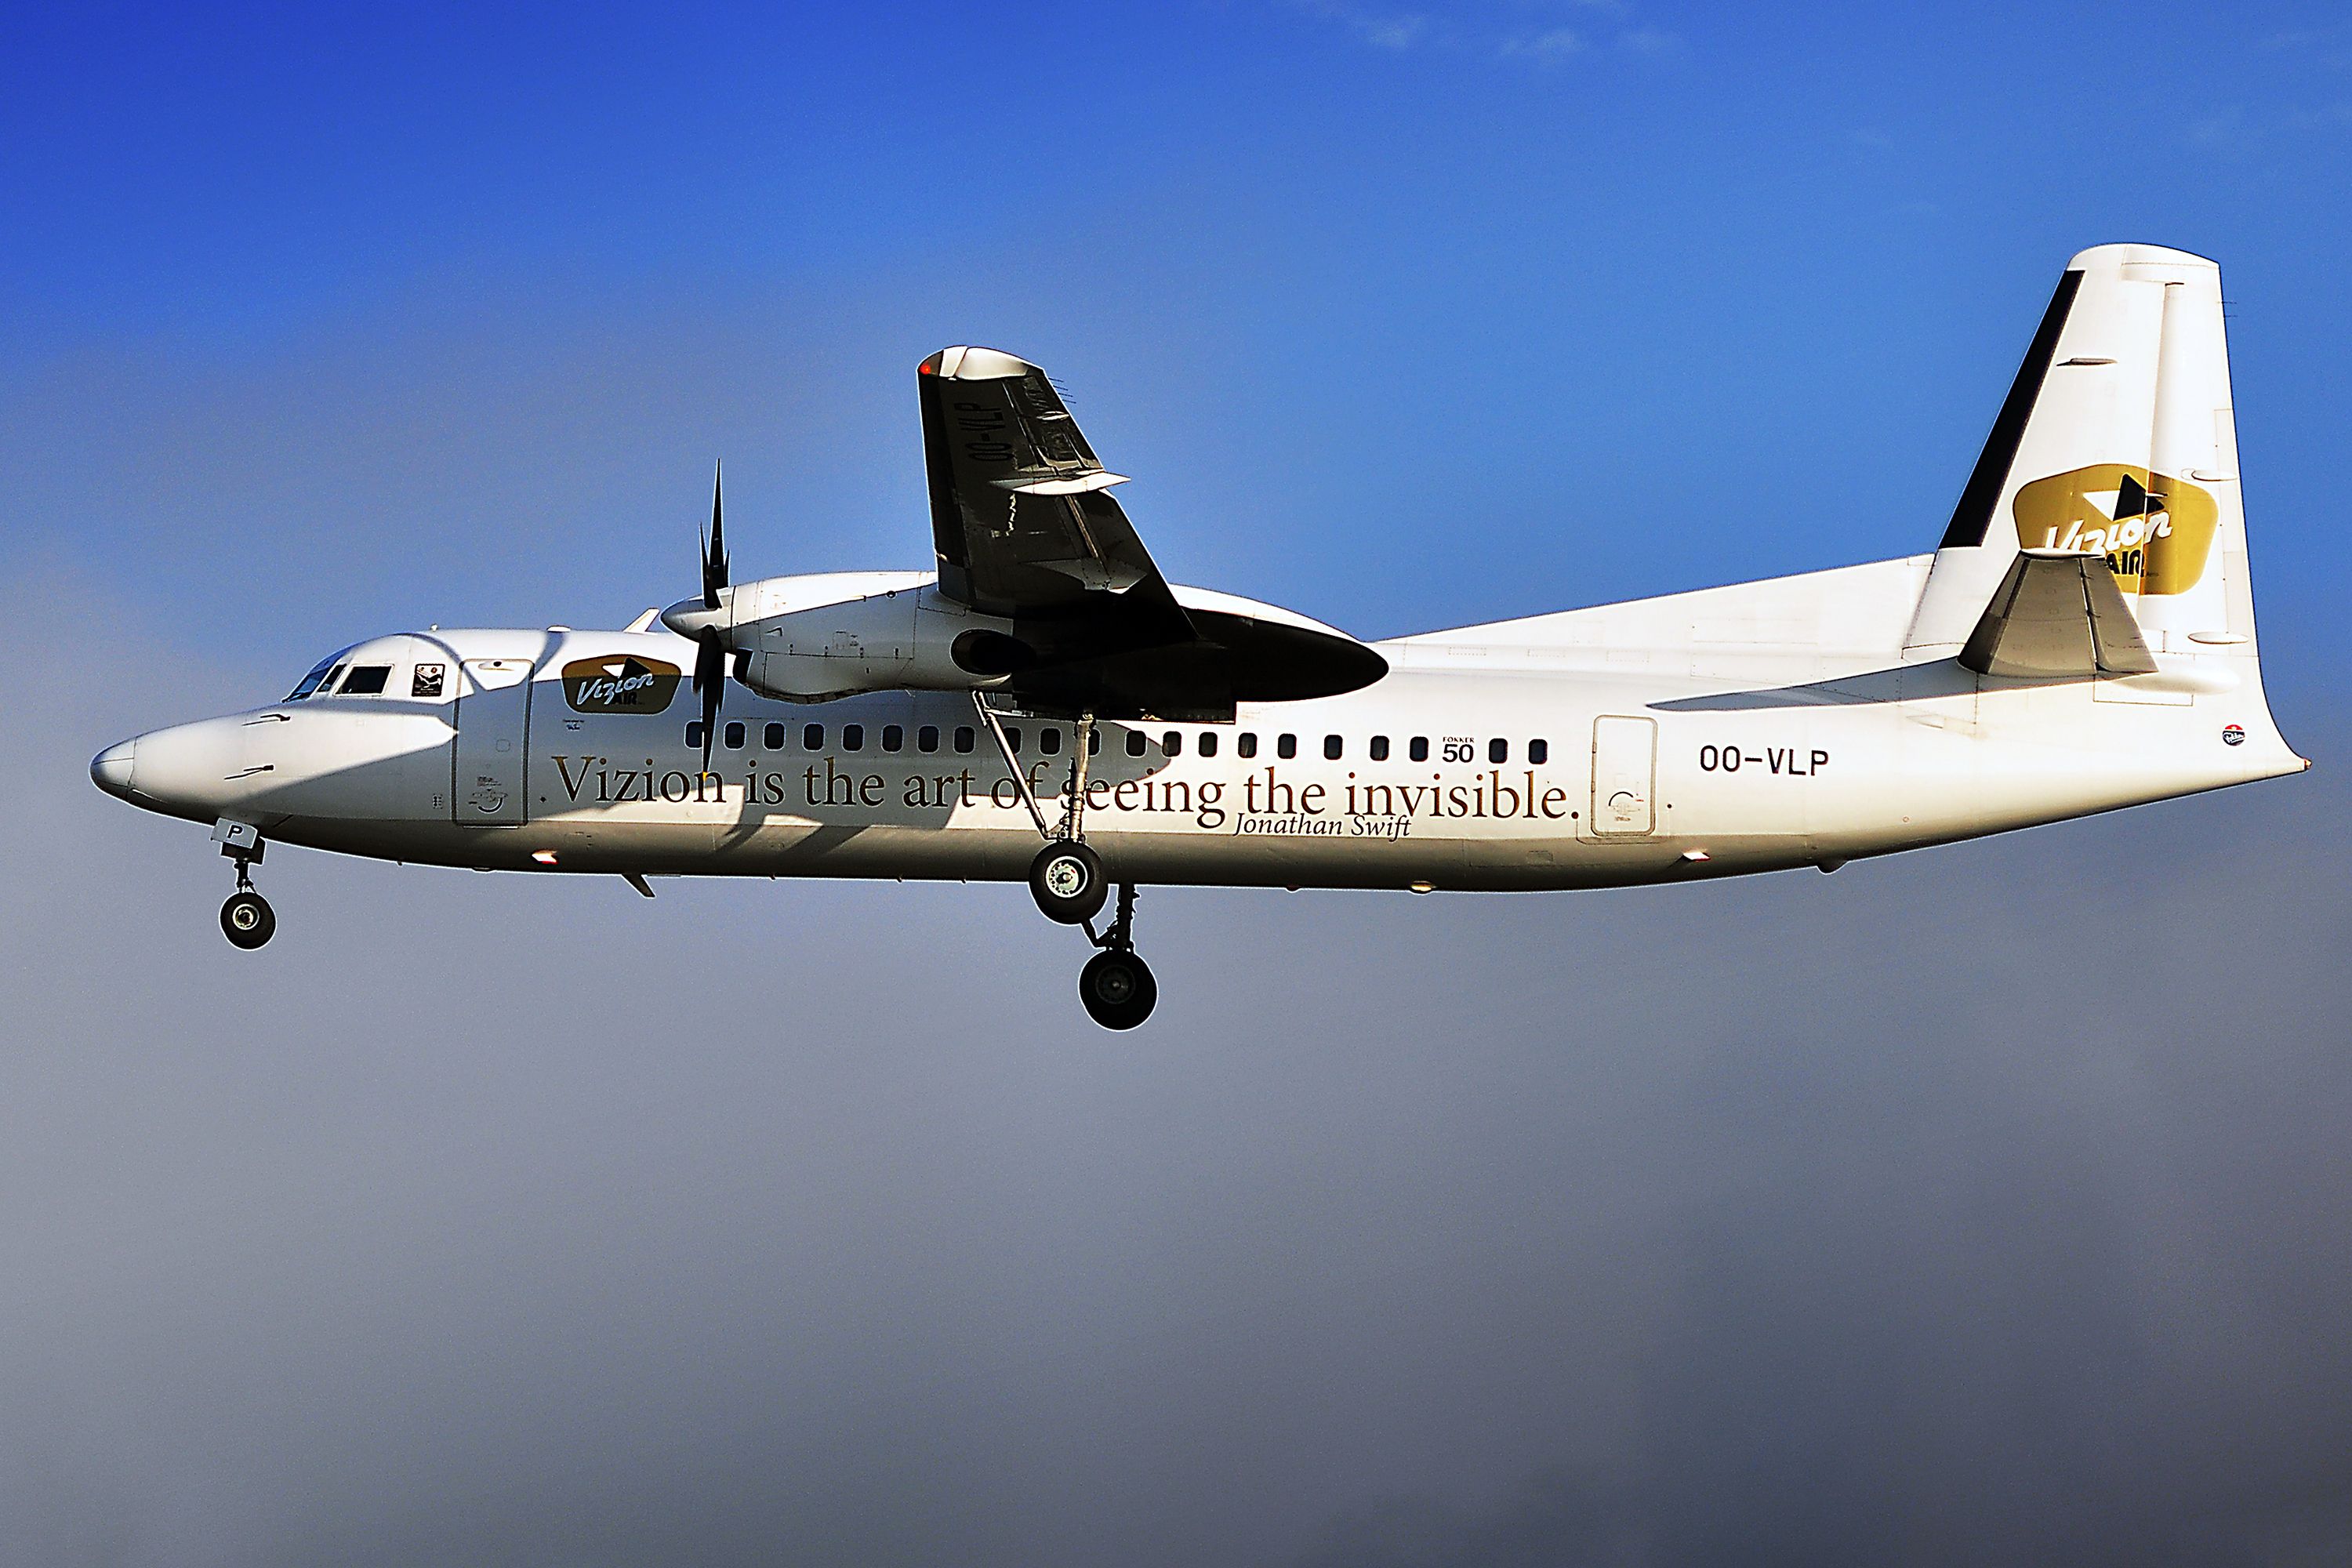 A Vizion Air turboprop flying in the sky.